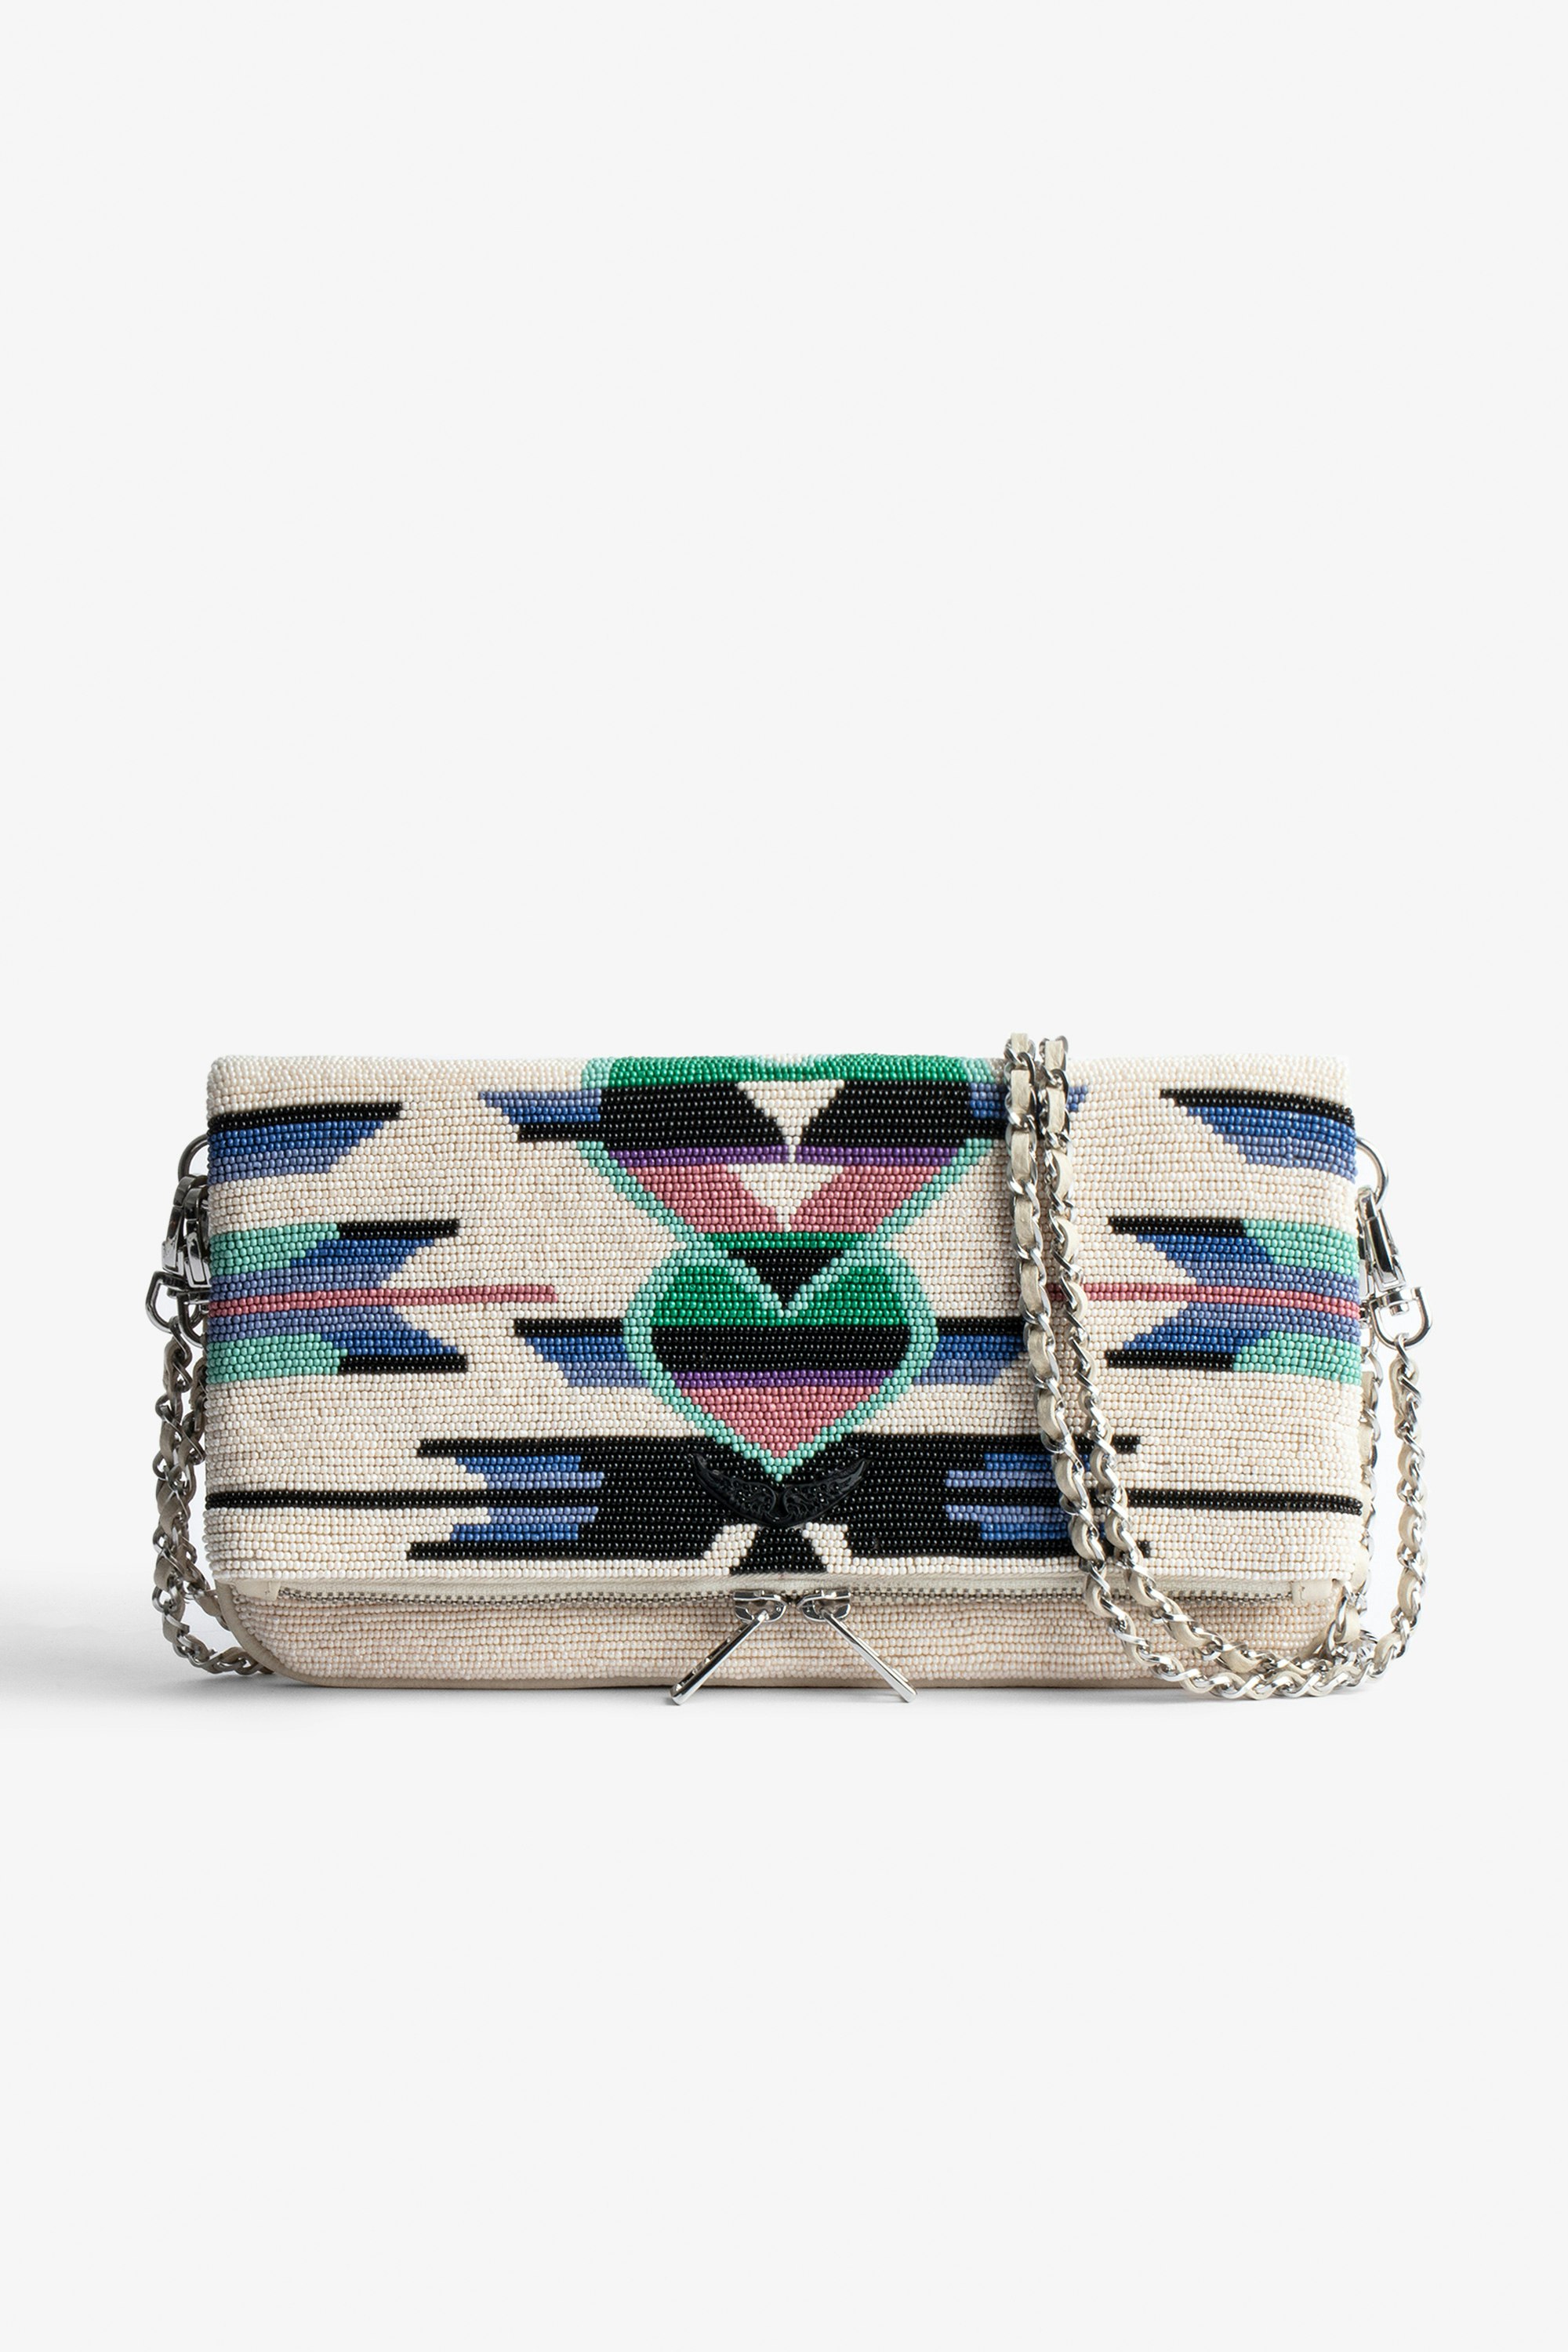 Rock Clutch Women’s clutch in ecru leather with multicolour beads and a double leather-and-metal chain